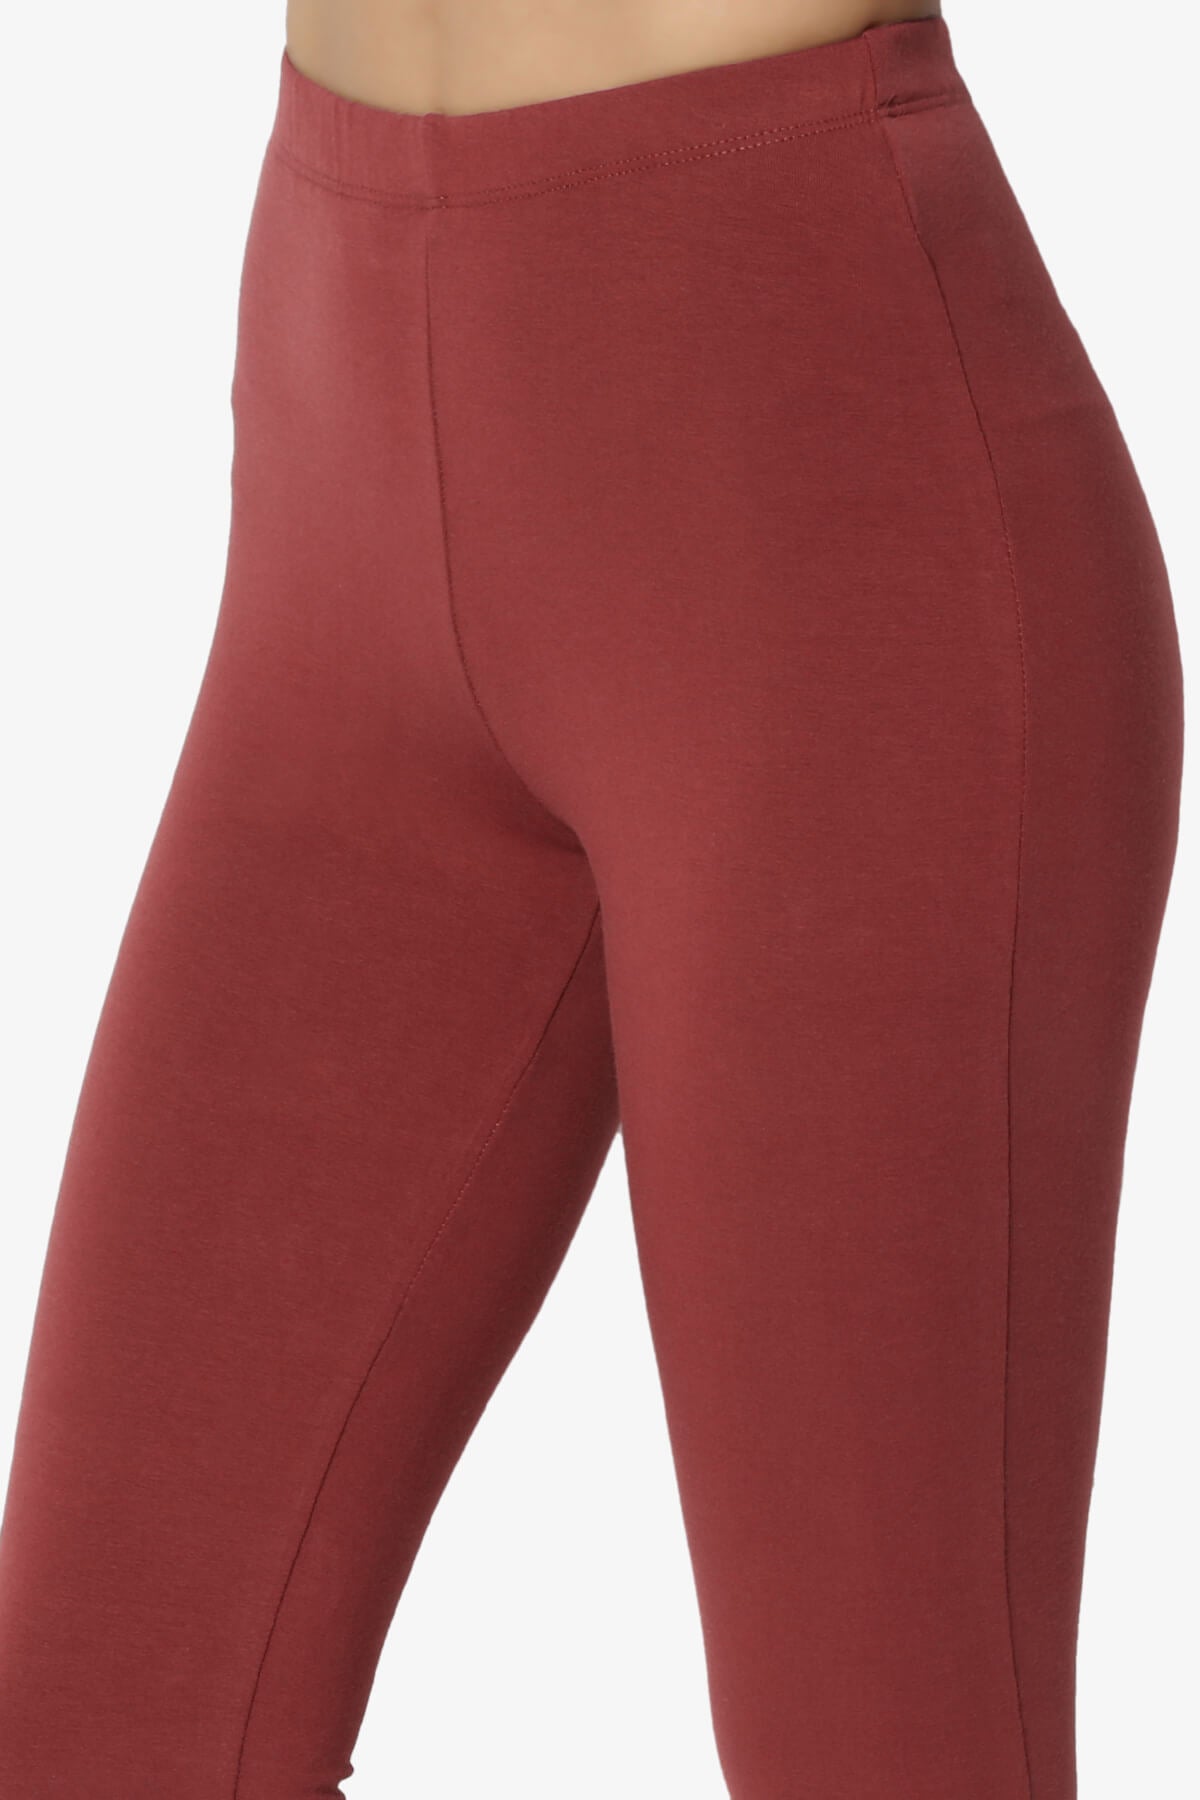 Load image into Gallery viewer, Ansley Luxe Cotton Capri Leggings BRICK_5
